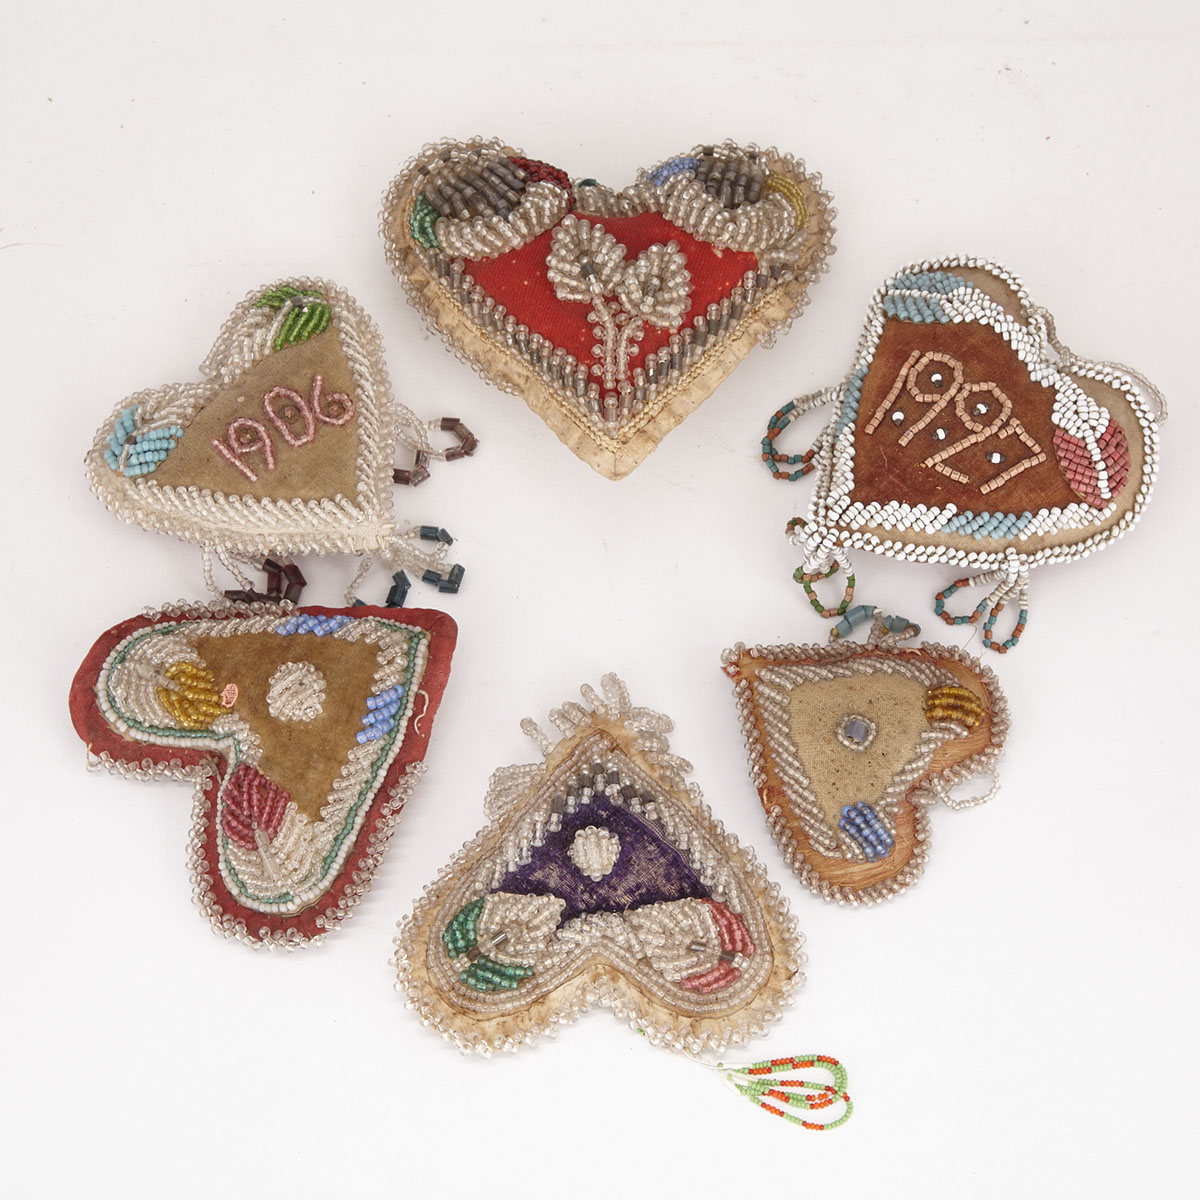 Six Iroquois Heart Shaped Pin Cushion Whimsies, early 20th century